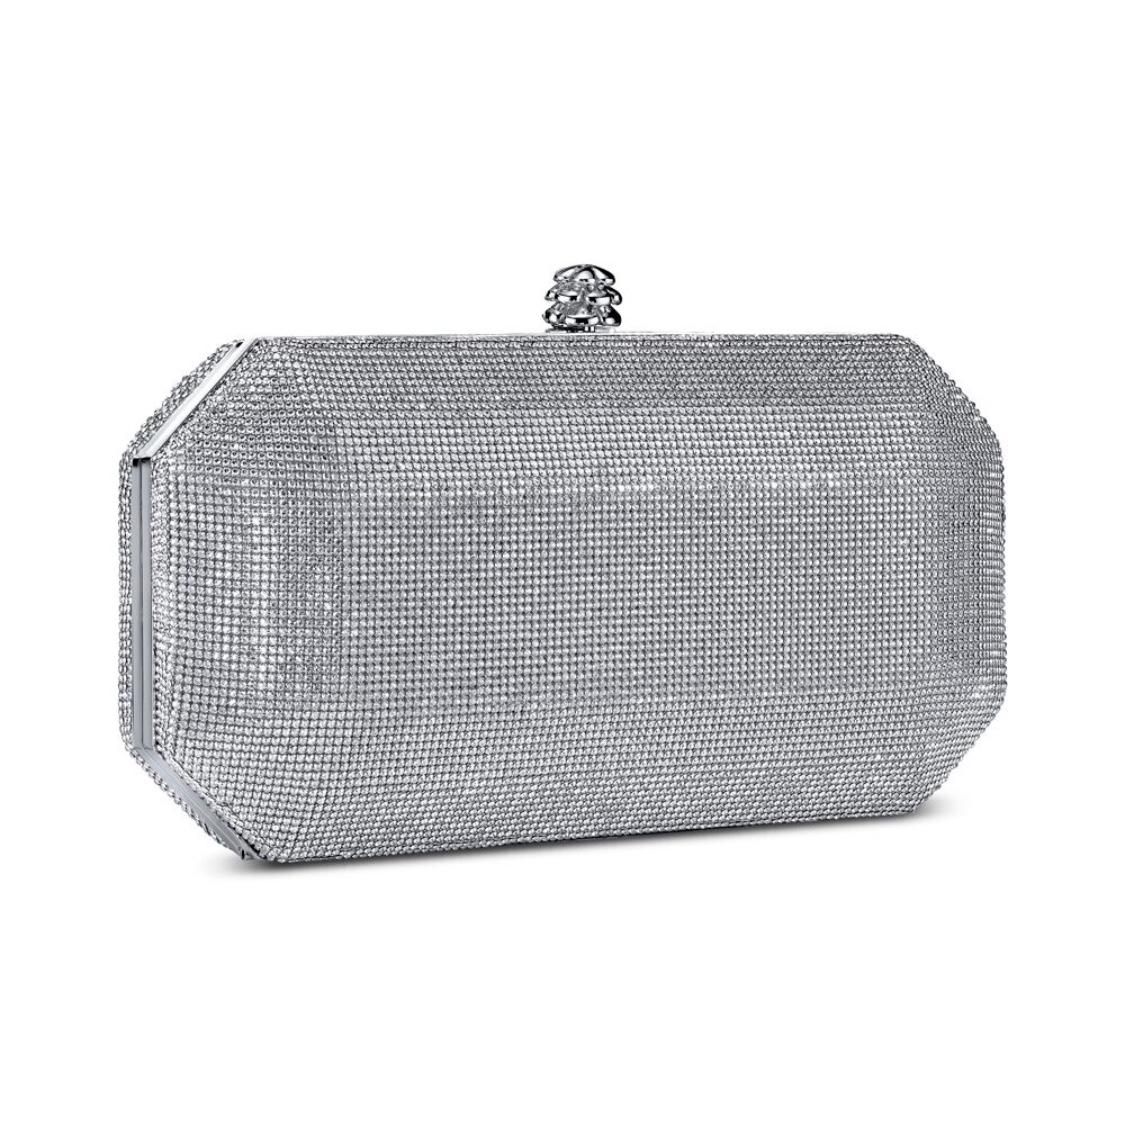 The Perry Clutch Small in Silver Swarovski Crystal Fine Mesh is a hard-framed clutch designed with interior pockets and an optional gold cross-body chain. Its elegant emerald shape is inspired by Tyler’s own engagement ring and named after her